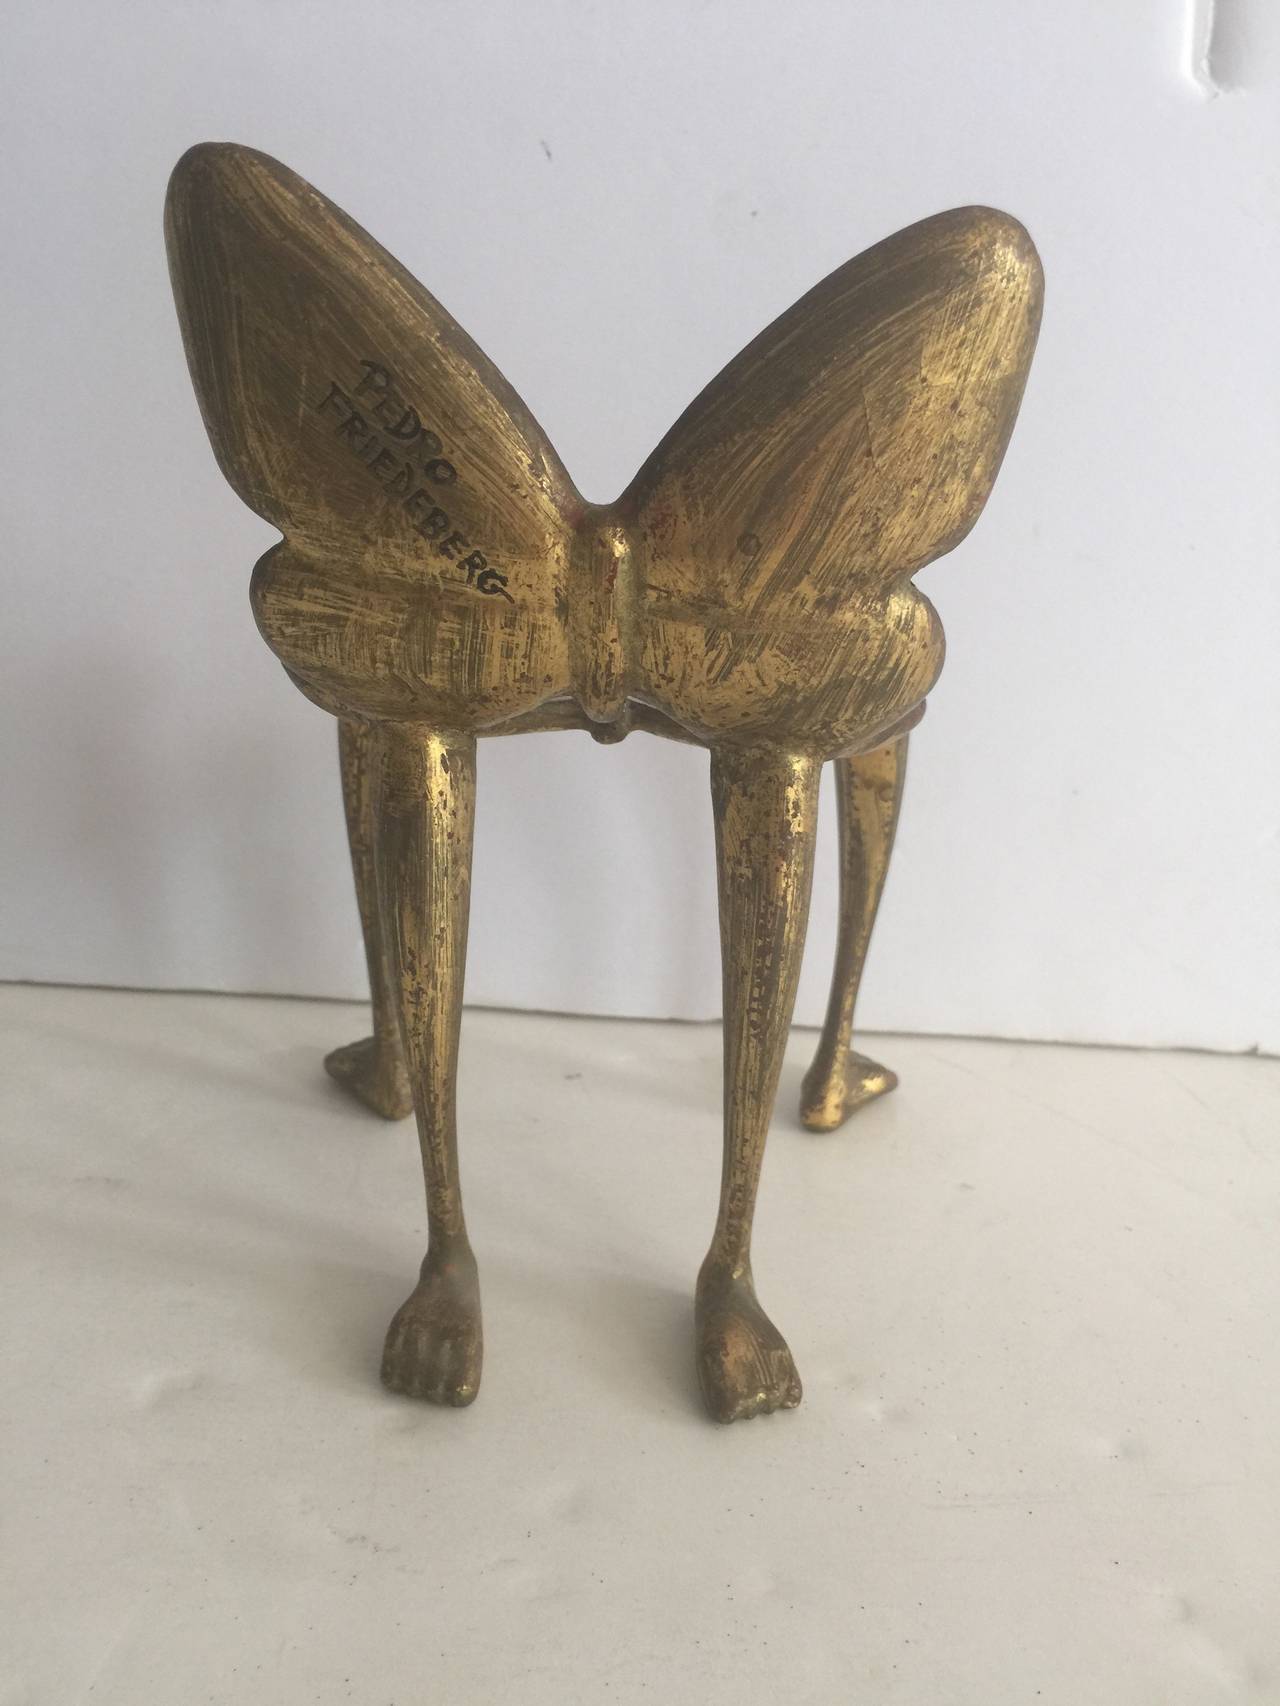 Polychromed Pedro Friedeberg Butterfly Chair Sculpture